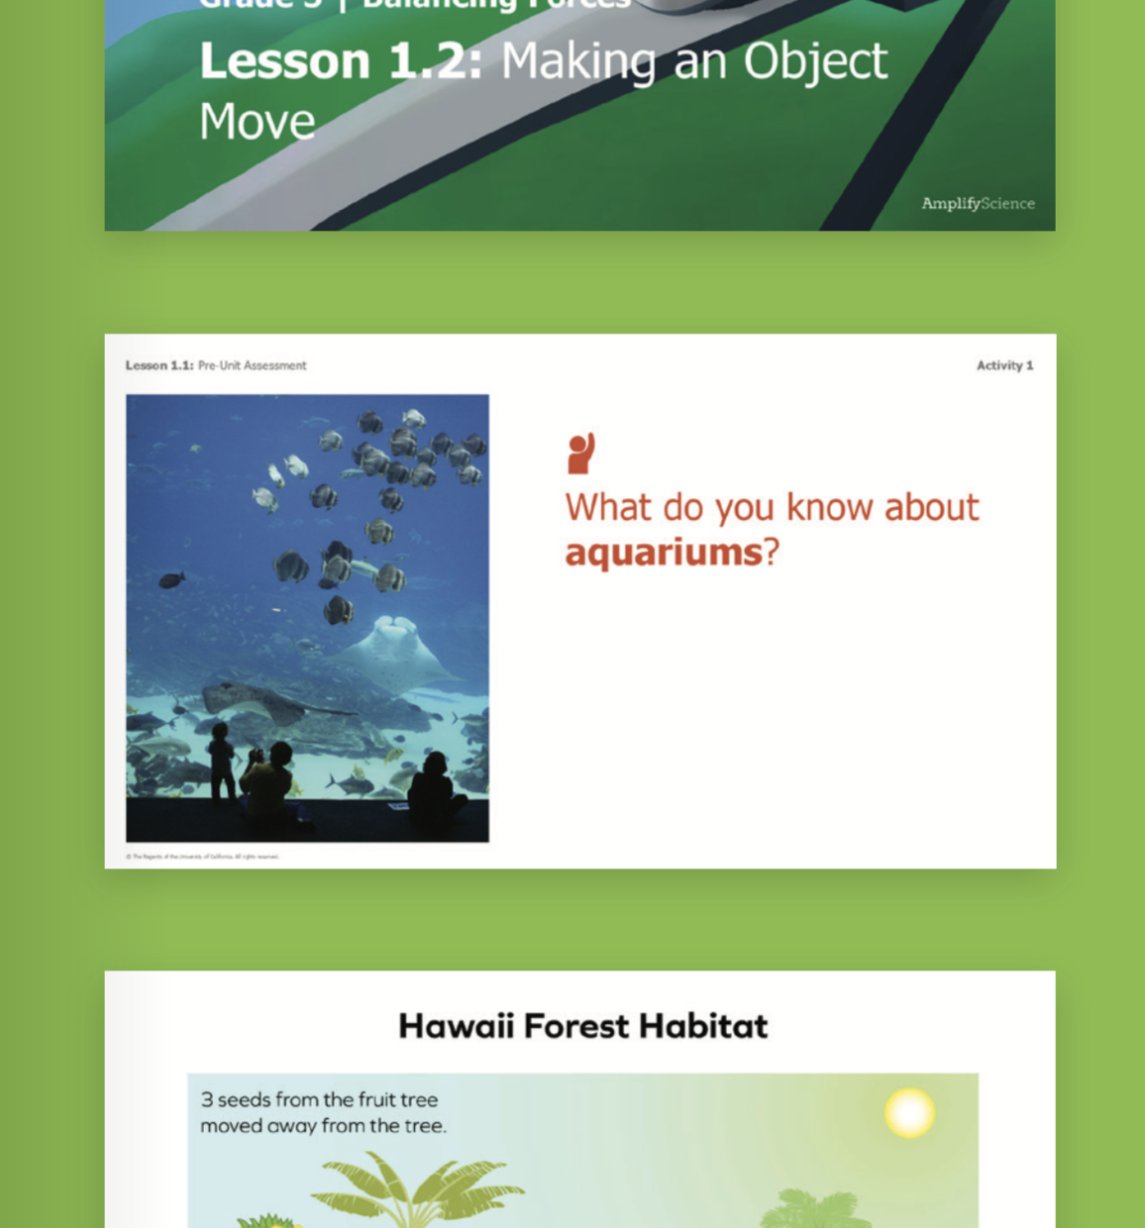 Educational material for grade 1, featuring a section about aquariums with an image of children observing jellyfish, and an introduction to forest habitats.